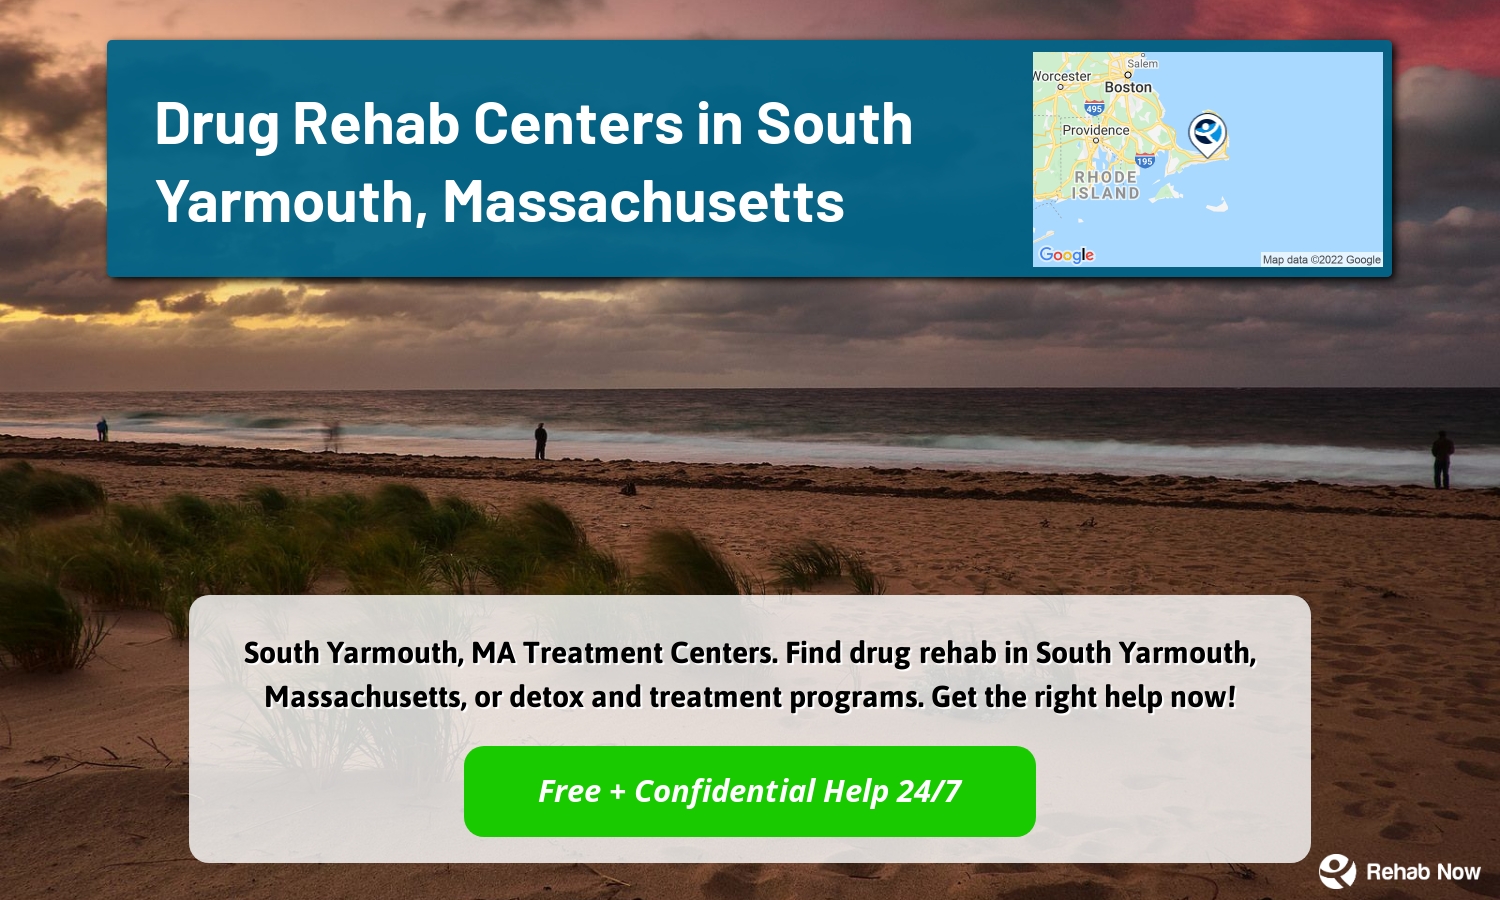 South Yarmouth, MA Treatment Centers. Find drug rehab in South Yarmouth, Massachusetts, or detox and treatment programs. Get the right help now!